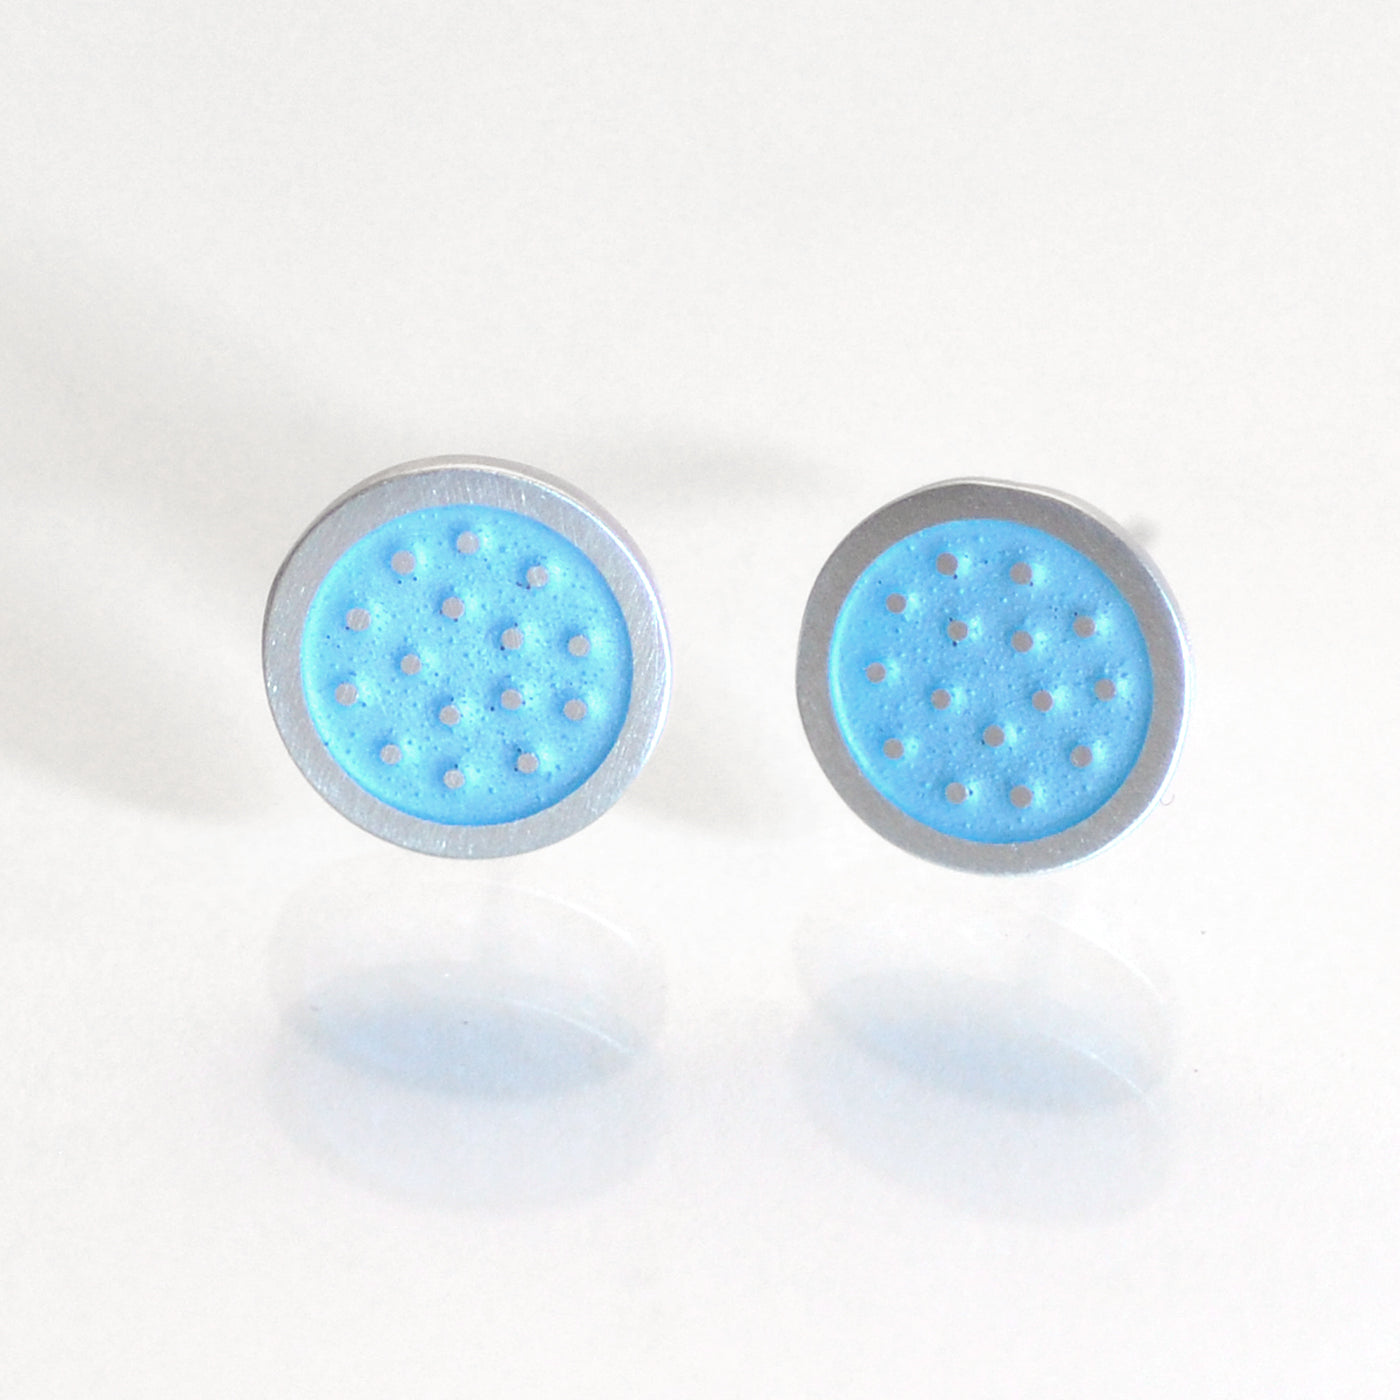 Dotty silver and enamelled ear studs, small